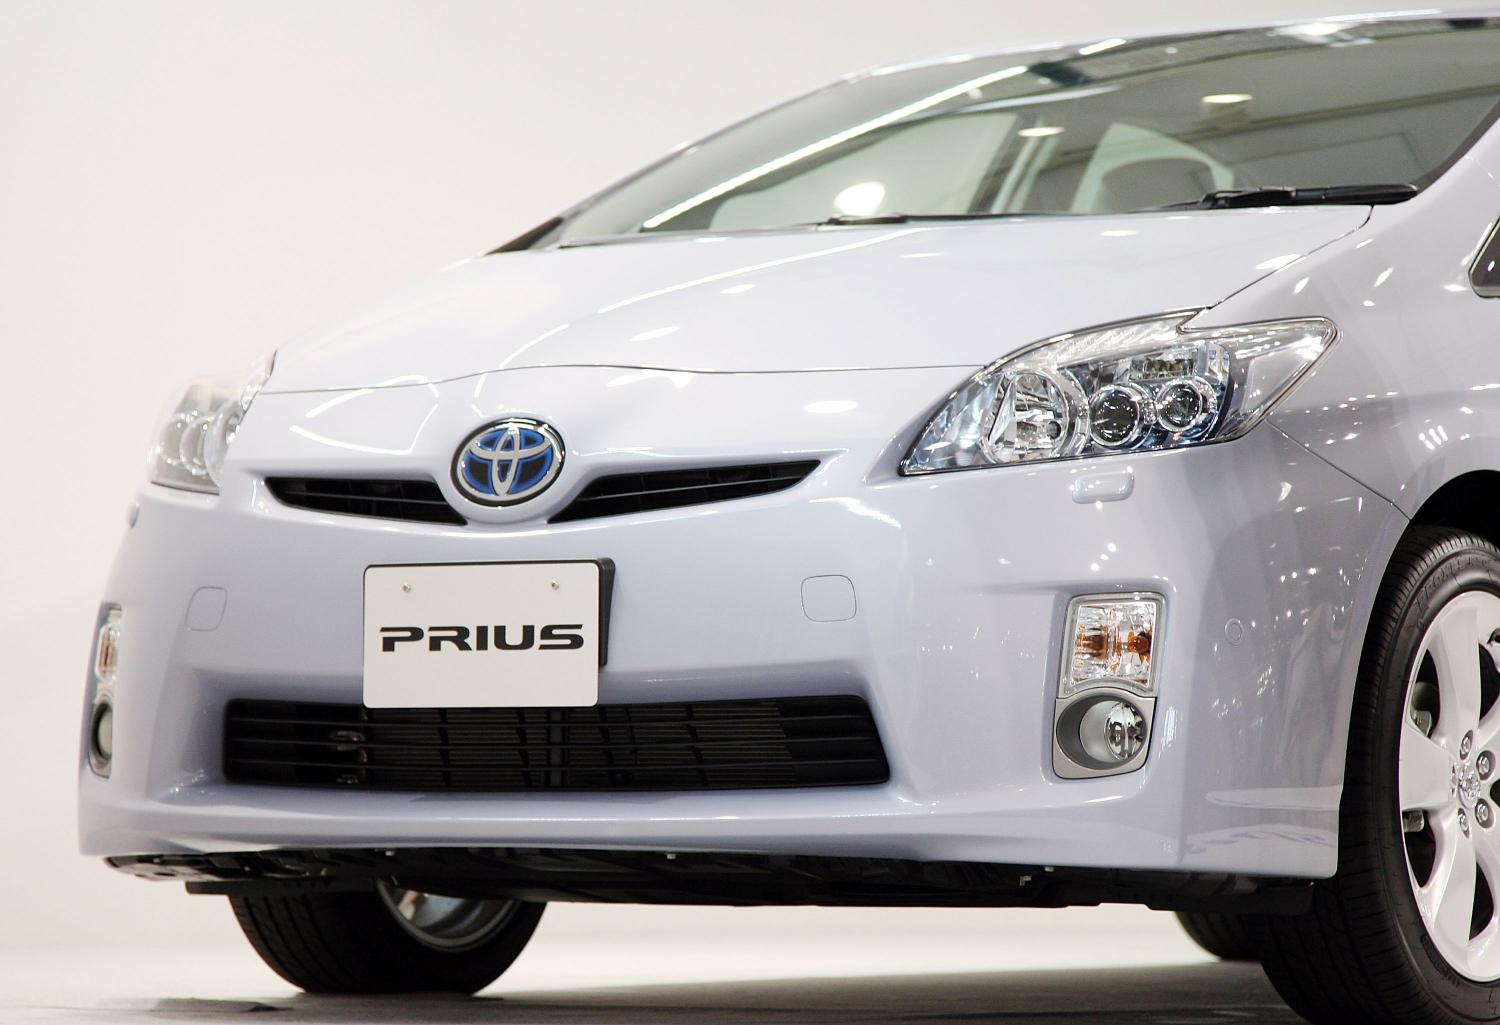 The Toyota Prius is a favorite among catalytic converter thieves